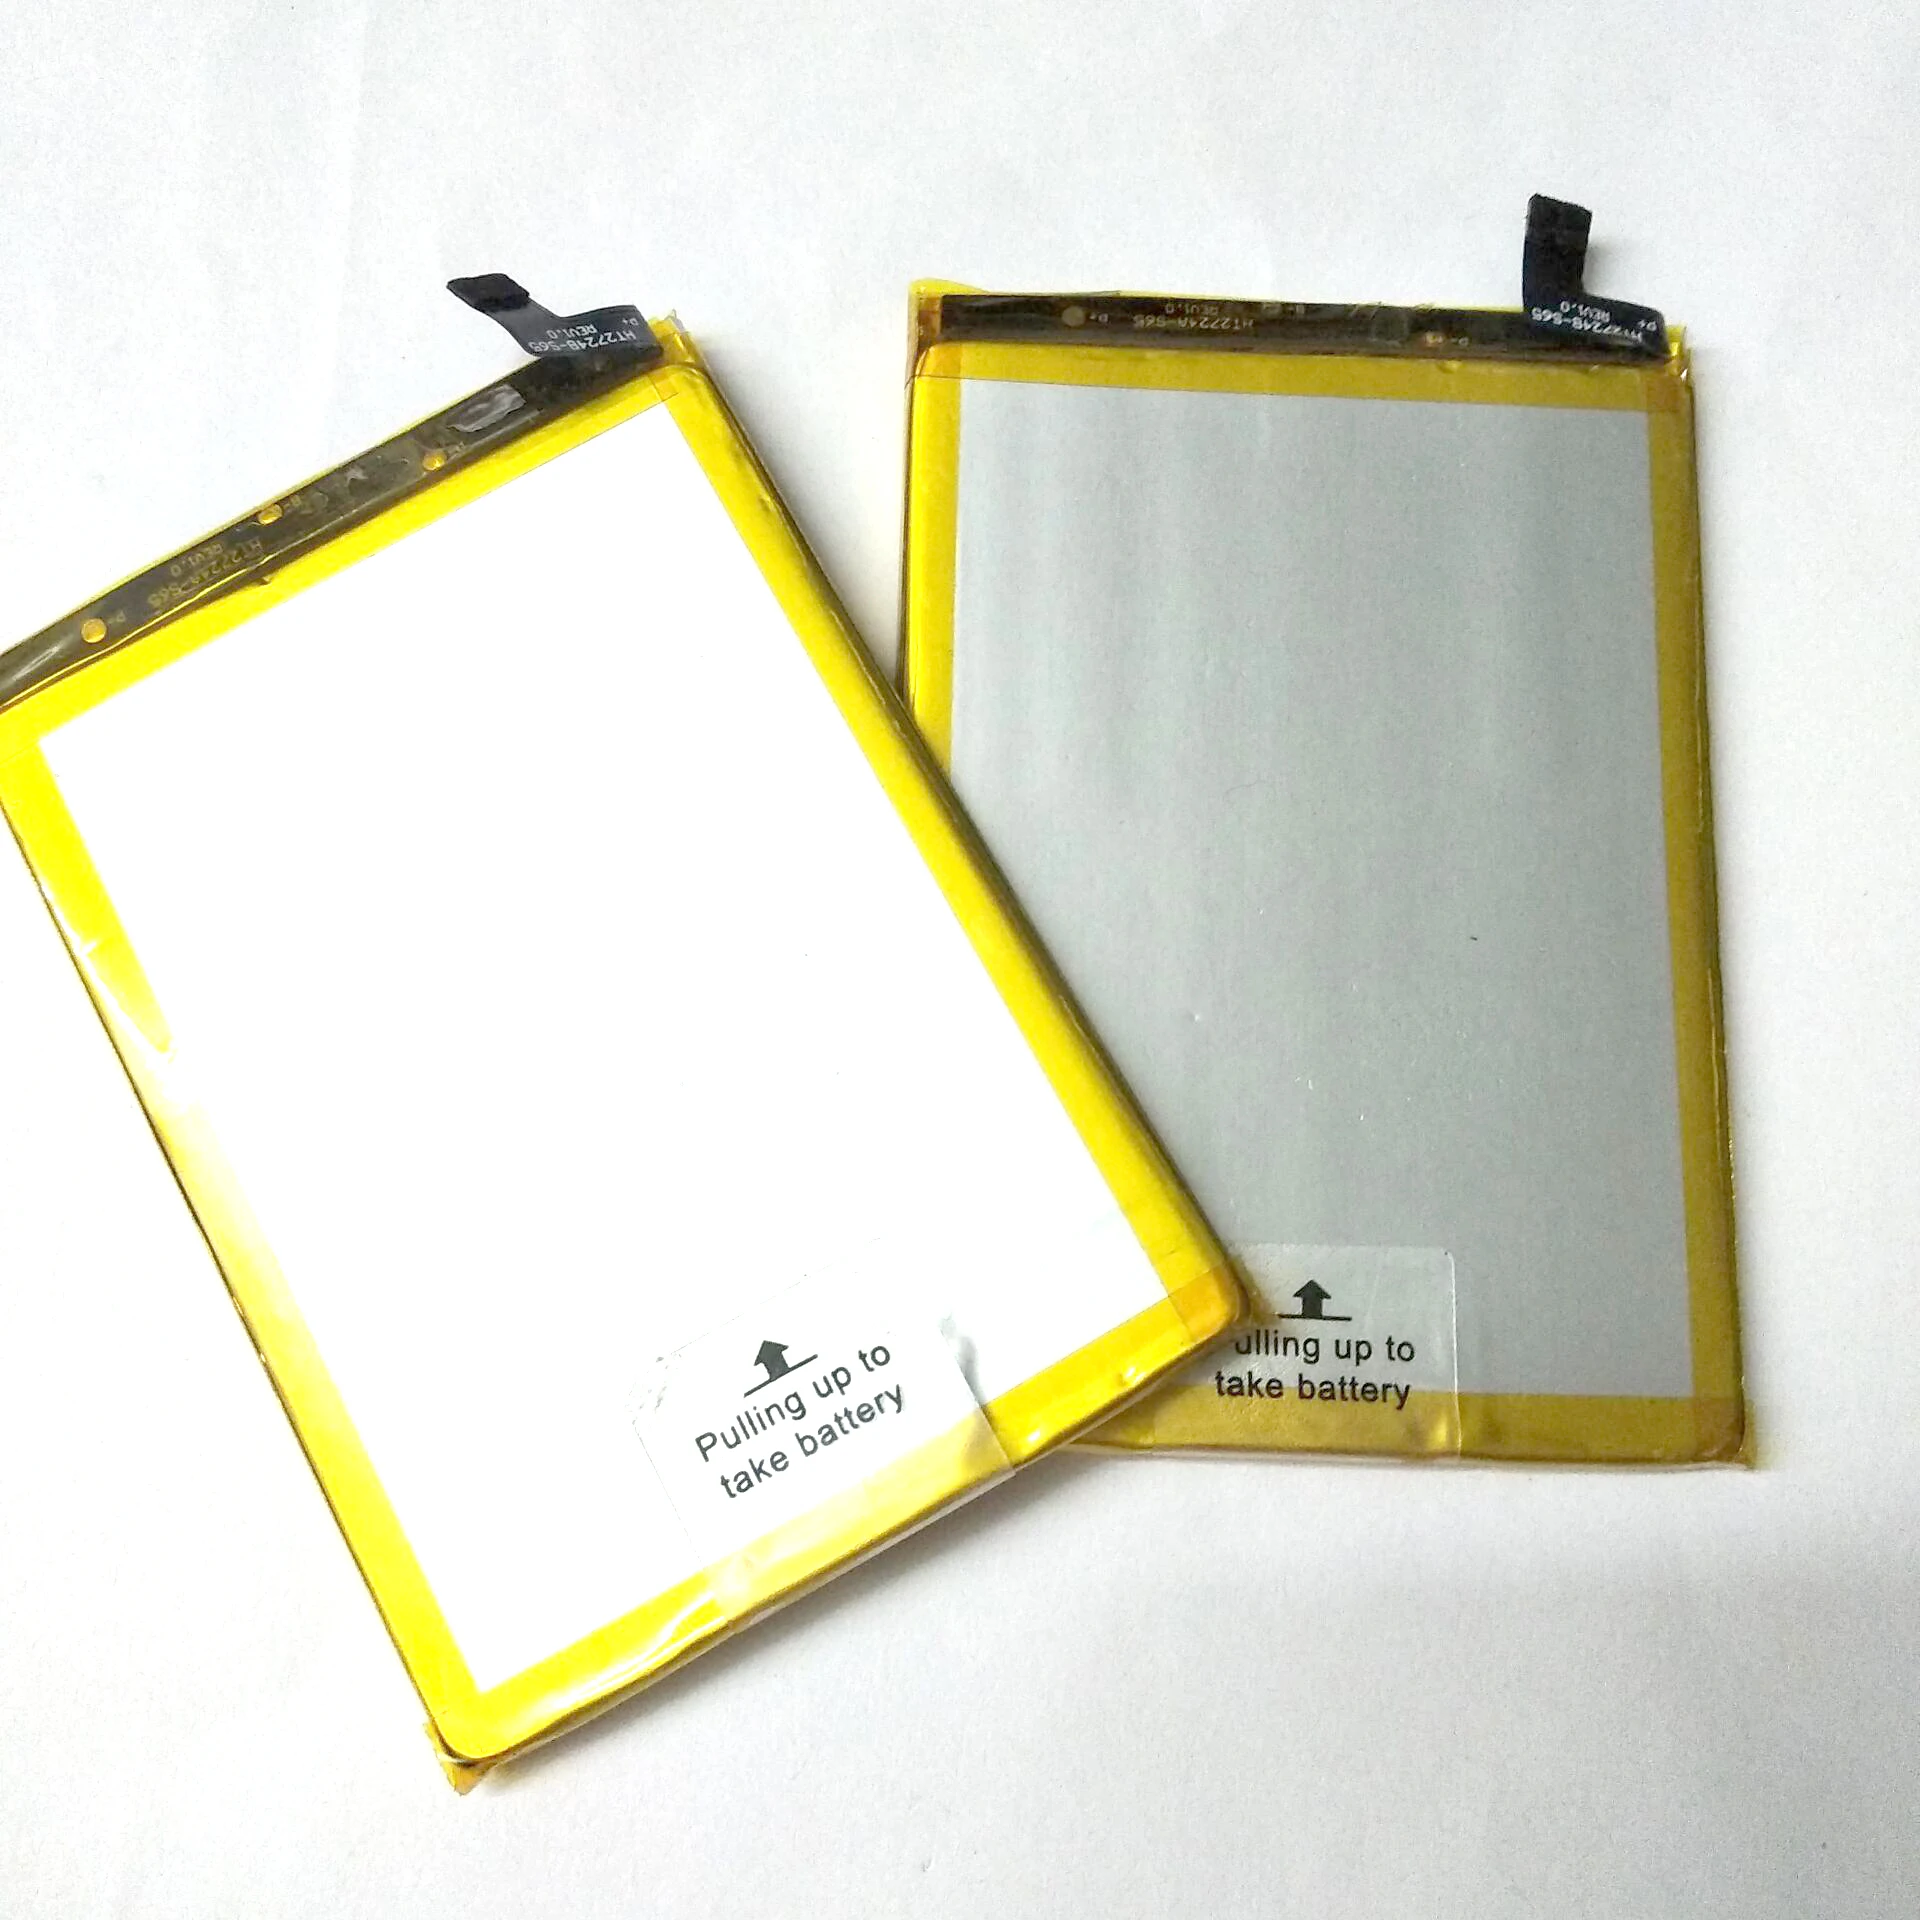 

Original Oukitel C15 Pro Battery High Quality Battery for Oukitel C15 Pro + Tracking Number,Used